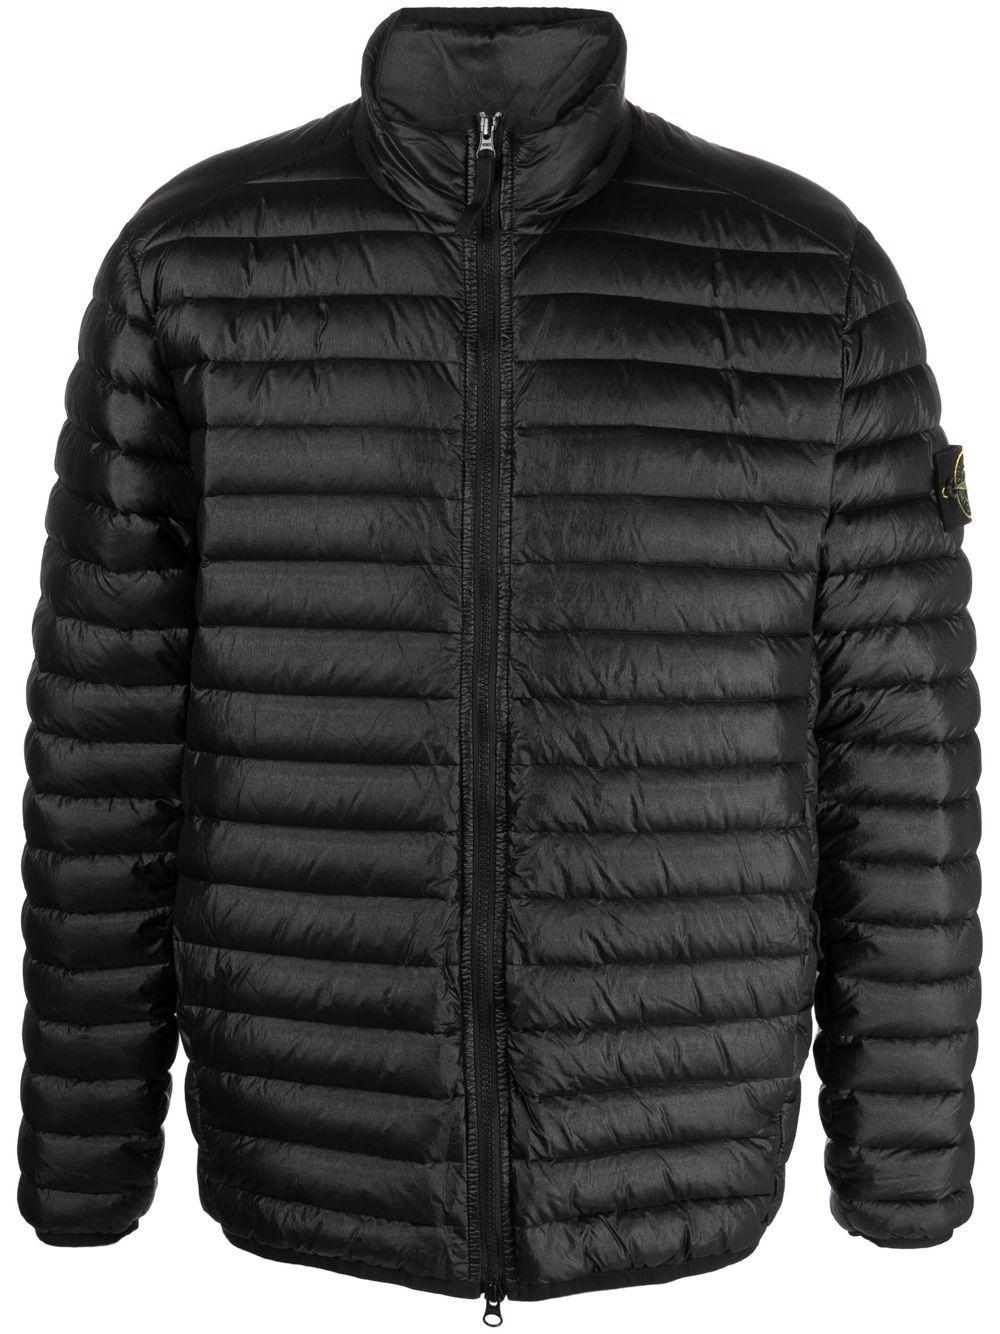 Techno-Nylon Down Jacket with Removable Logo Patch and Zippered Pockets